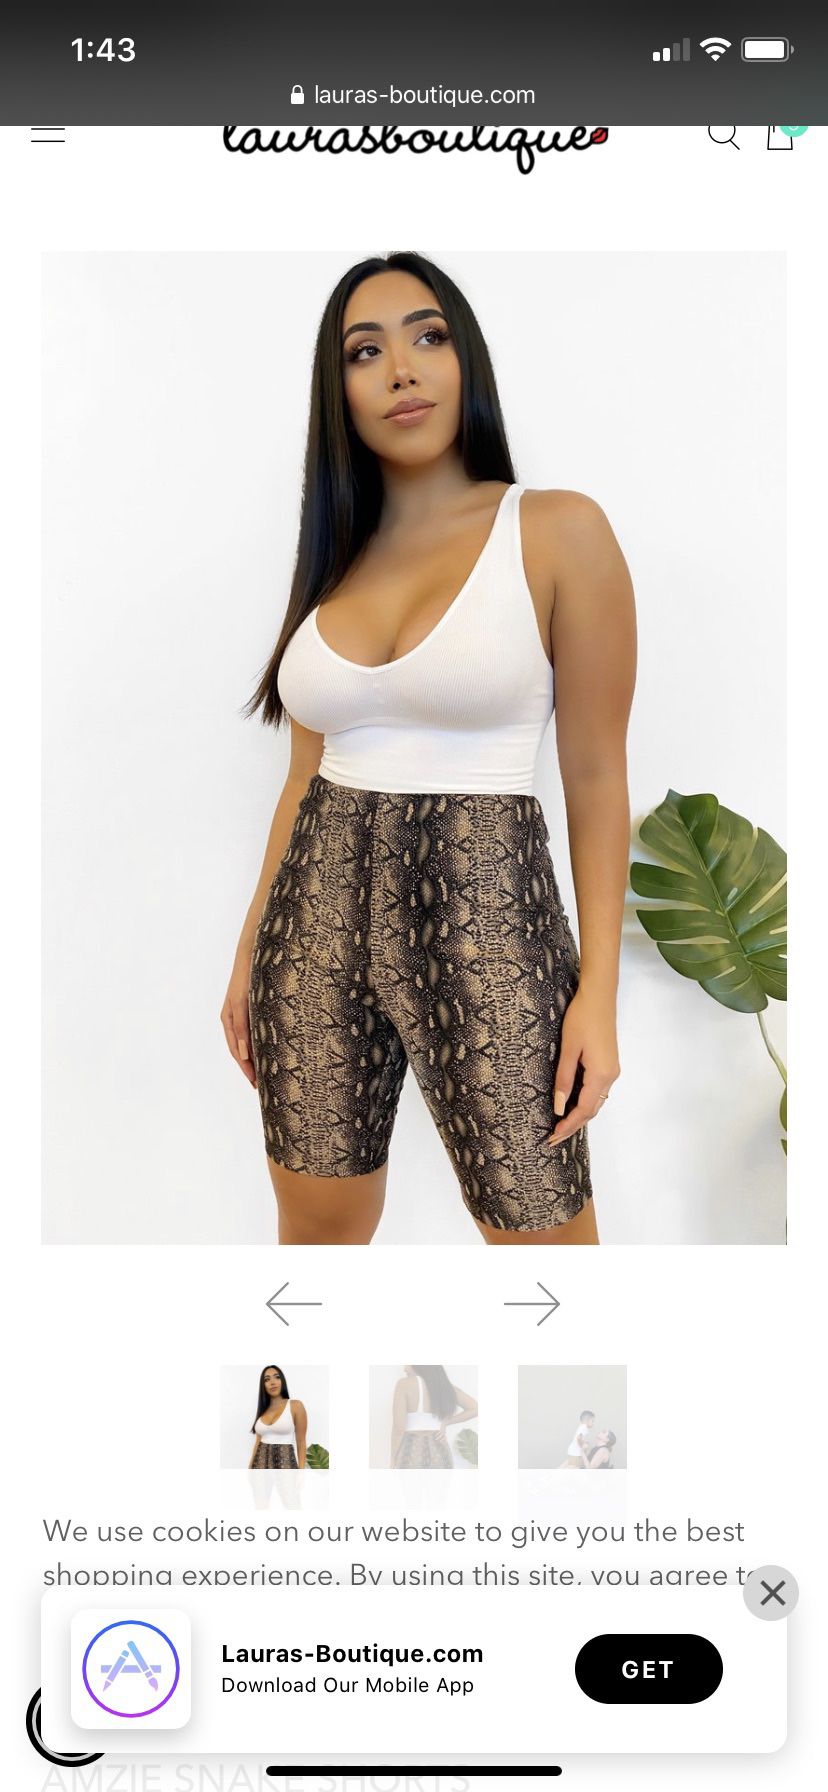 💸price Drop💸 🚨PRICE DROPPED🚨 Lauras Boutique - Snake Print Biker Shorts  (NEW) 